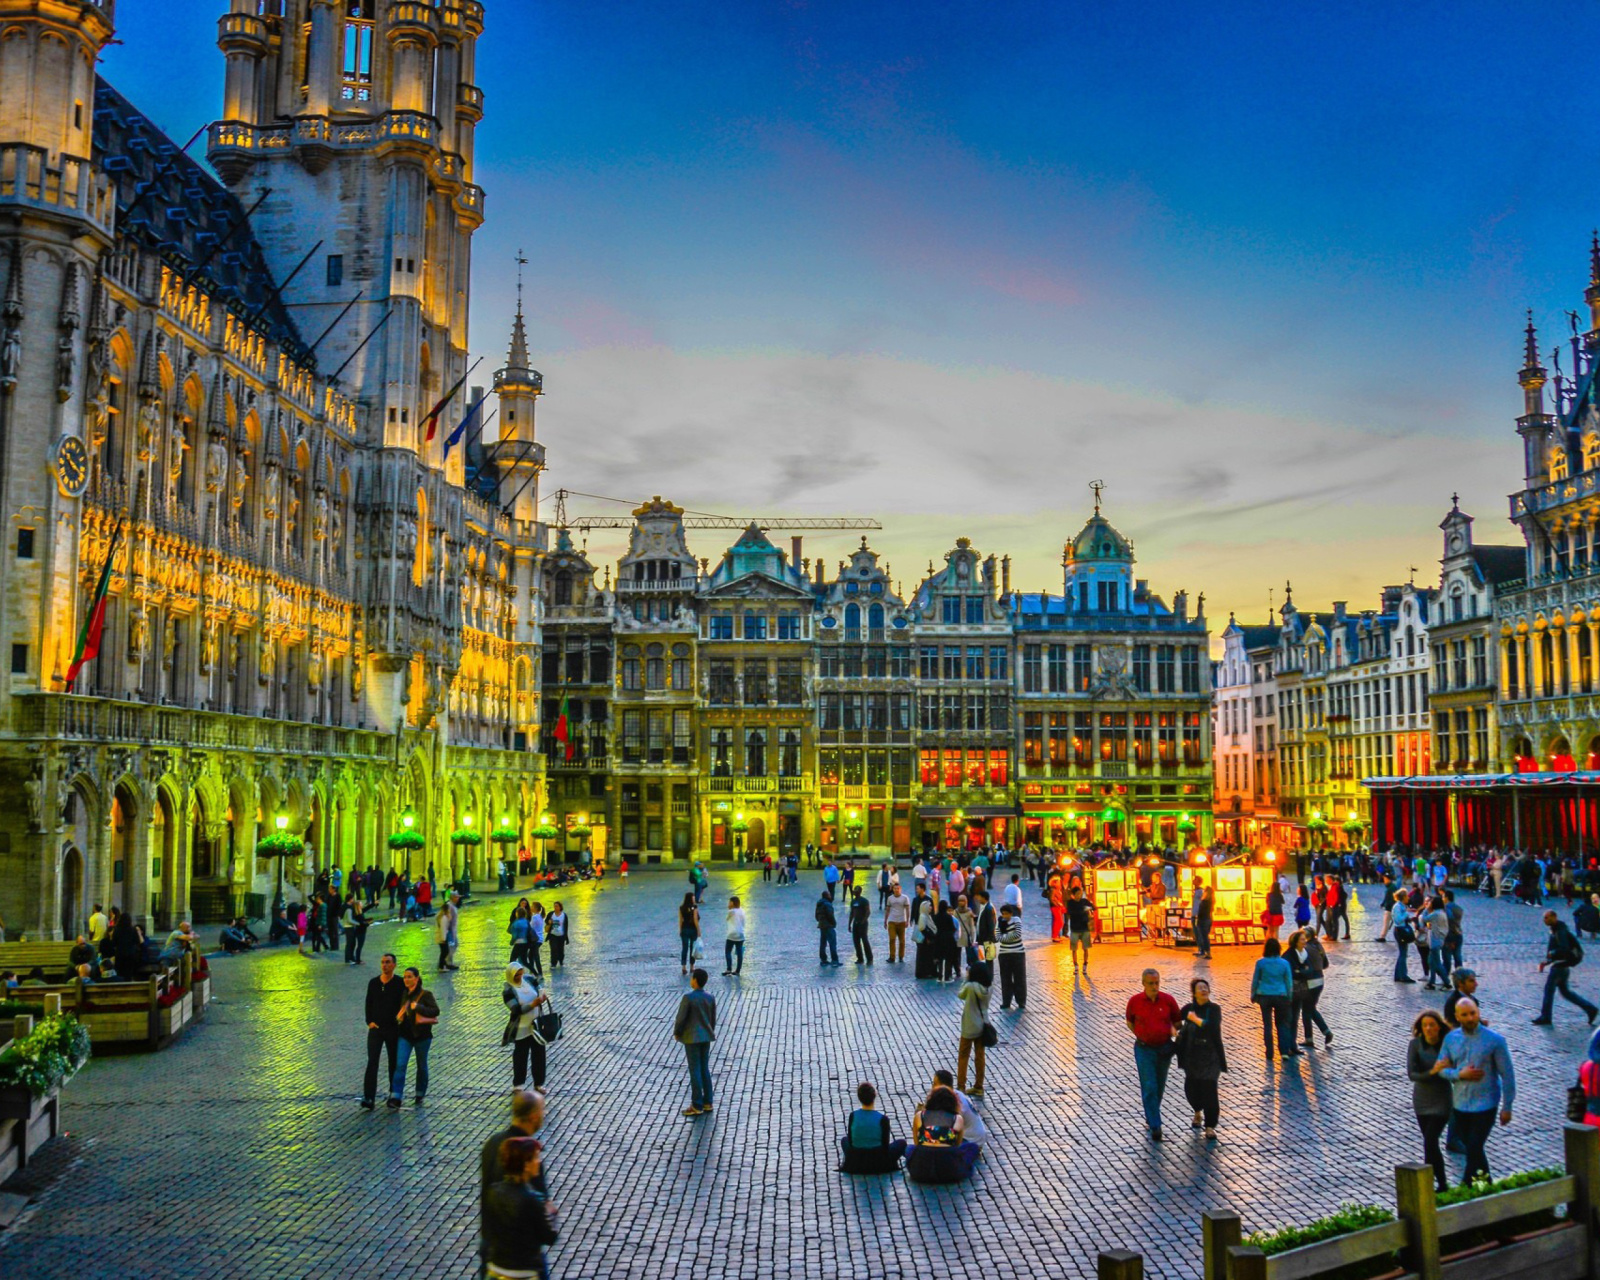 Grand place by night in Brussels screenshot #1 1600x1280